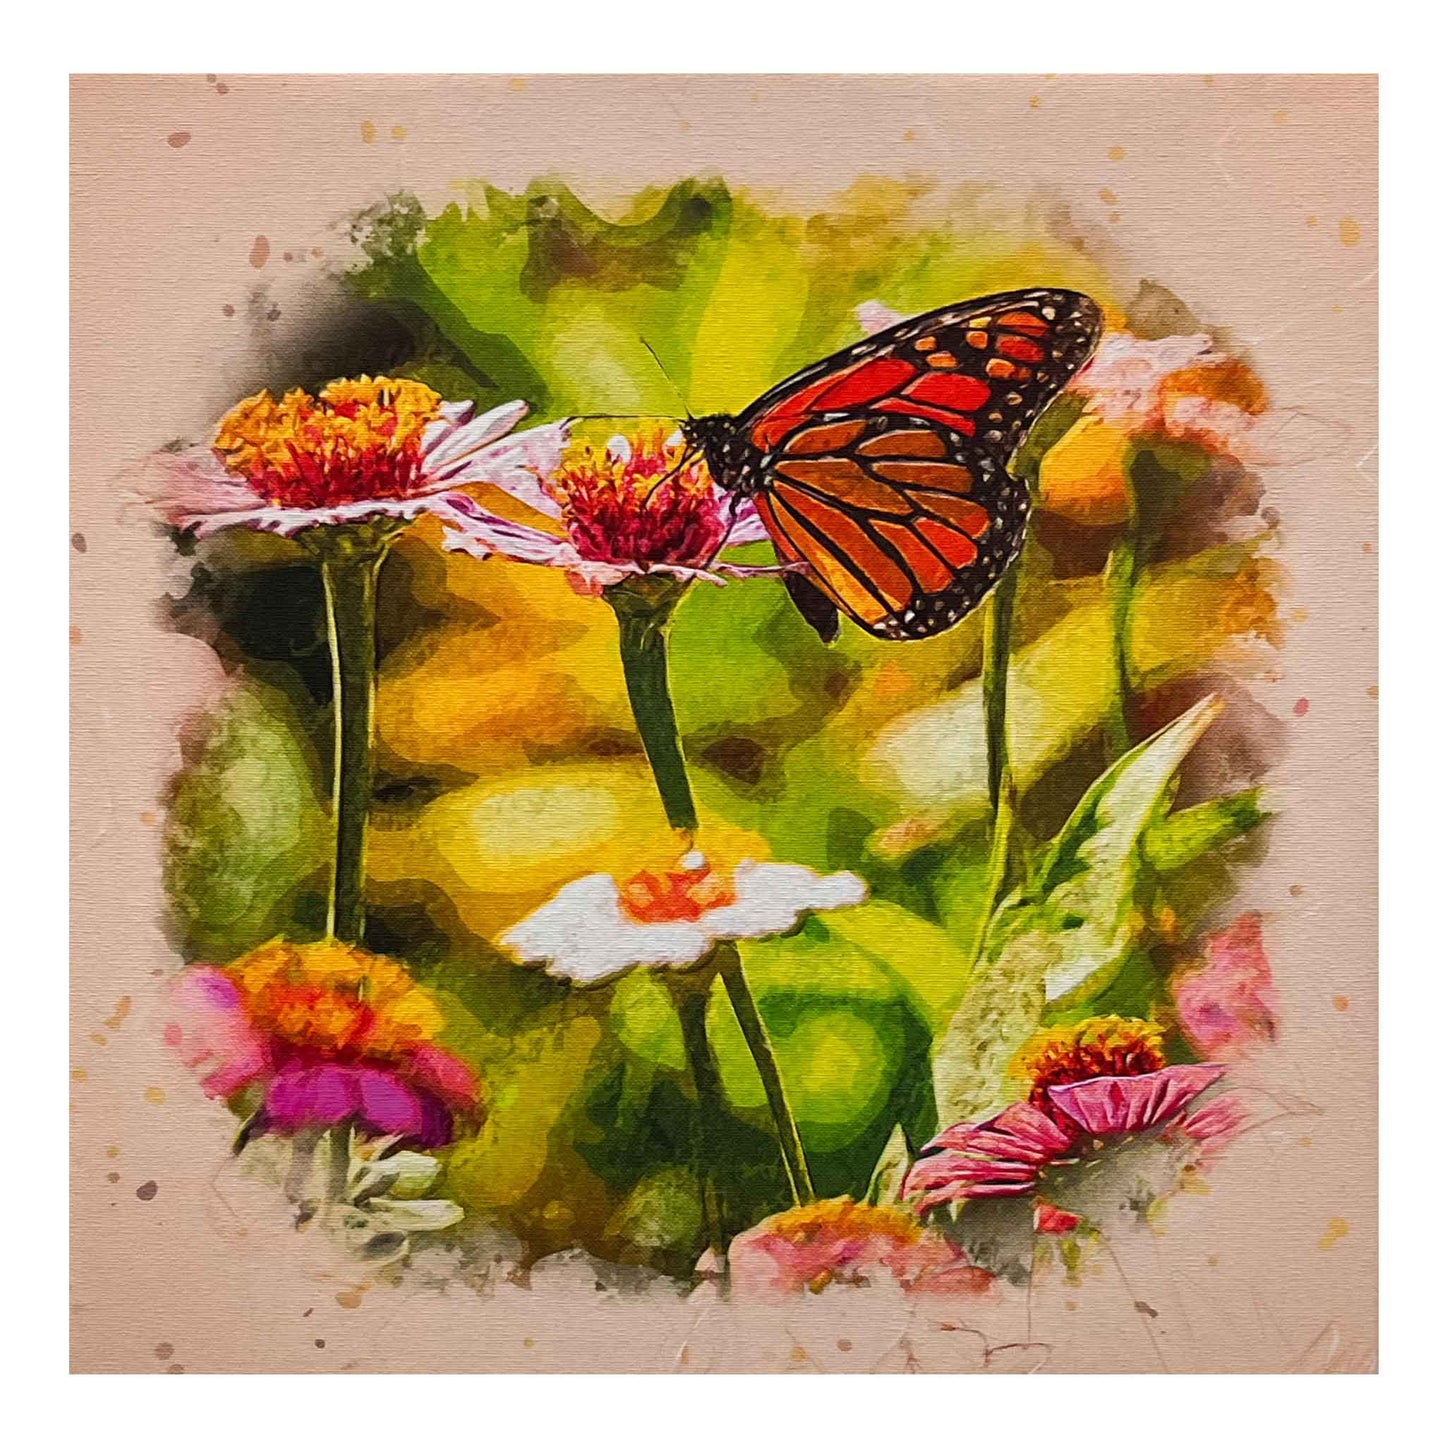 ECC "Monarch on Colorful Cosmos" Framed Canvas Print by Photographer Claire Closson. A lovely Monarch butterfly is perched atop a pink cosmos flower. Pink and white flowers with brilliant orange centers. Green and yellow leaves are suggested in the blurred background. 12 x 12 inches printed on canvas.